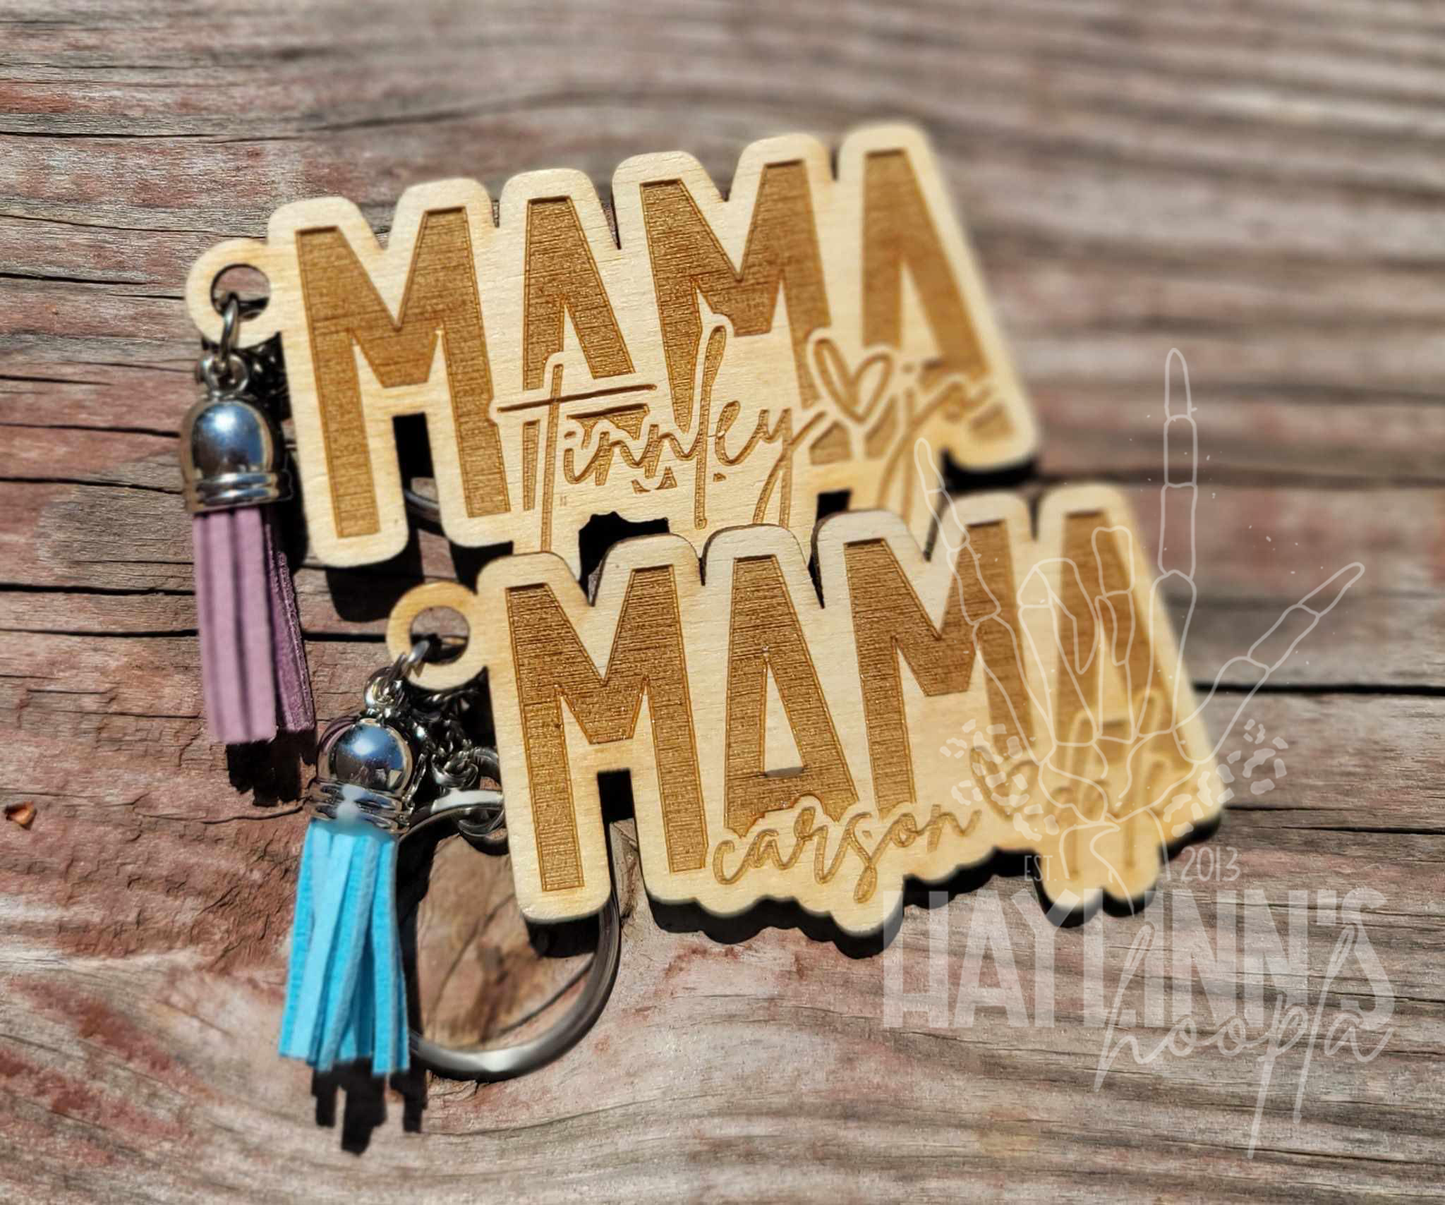 Personalized ENGRAVED Wood Keychains